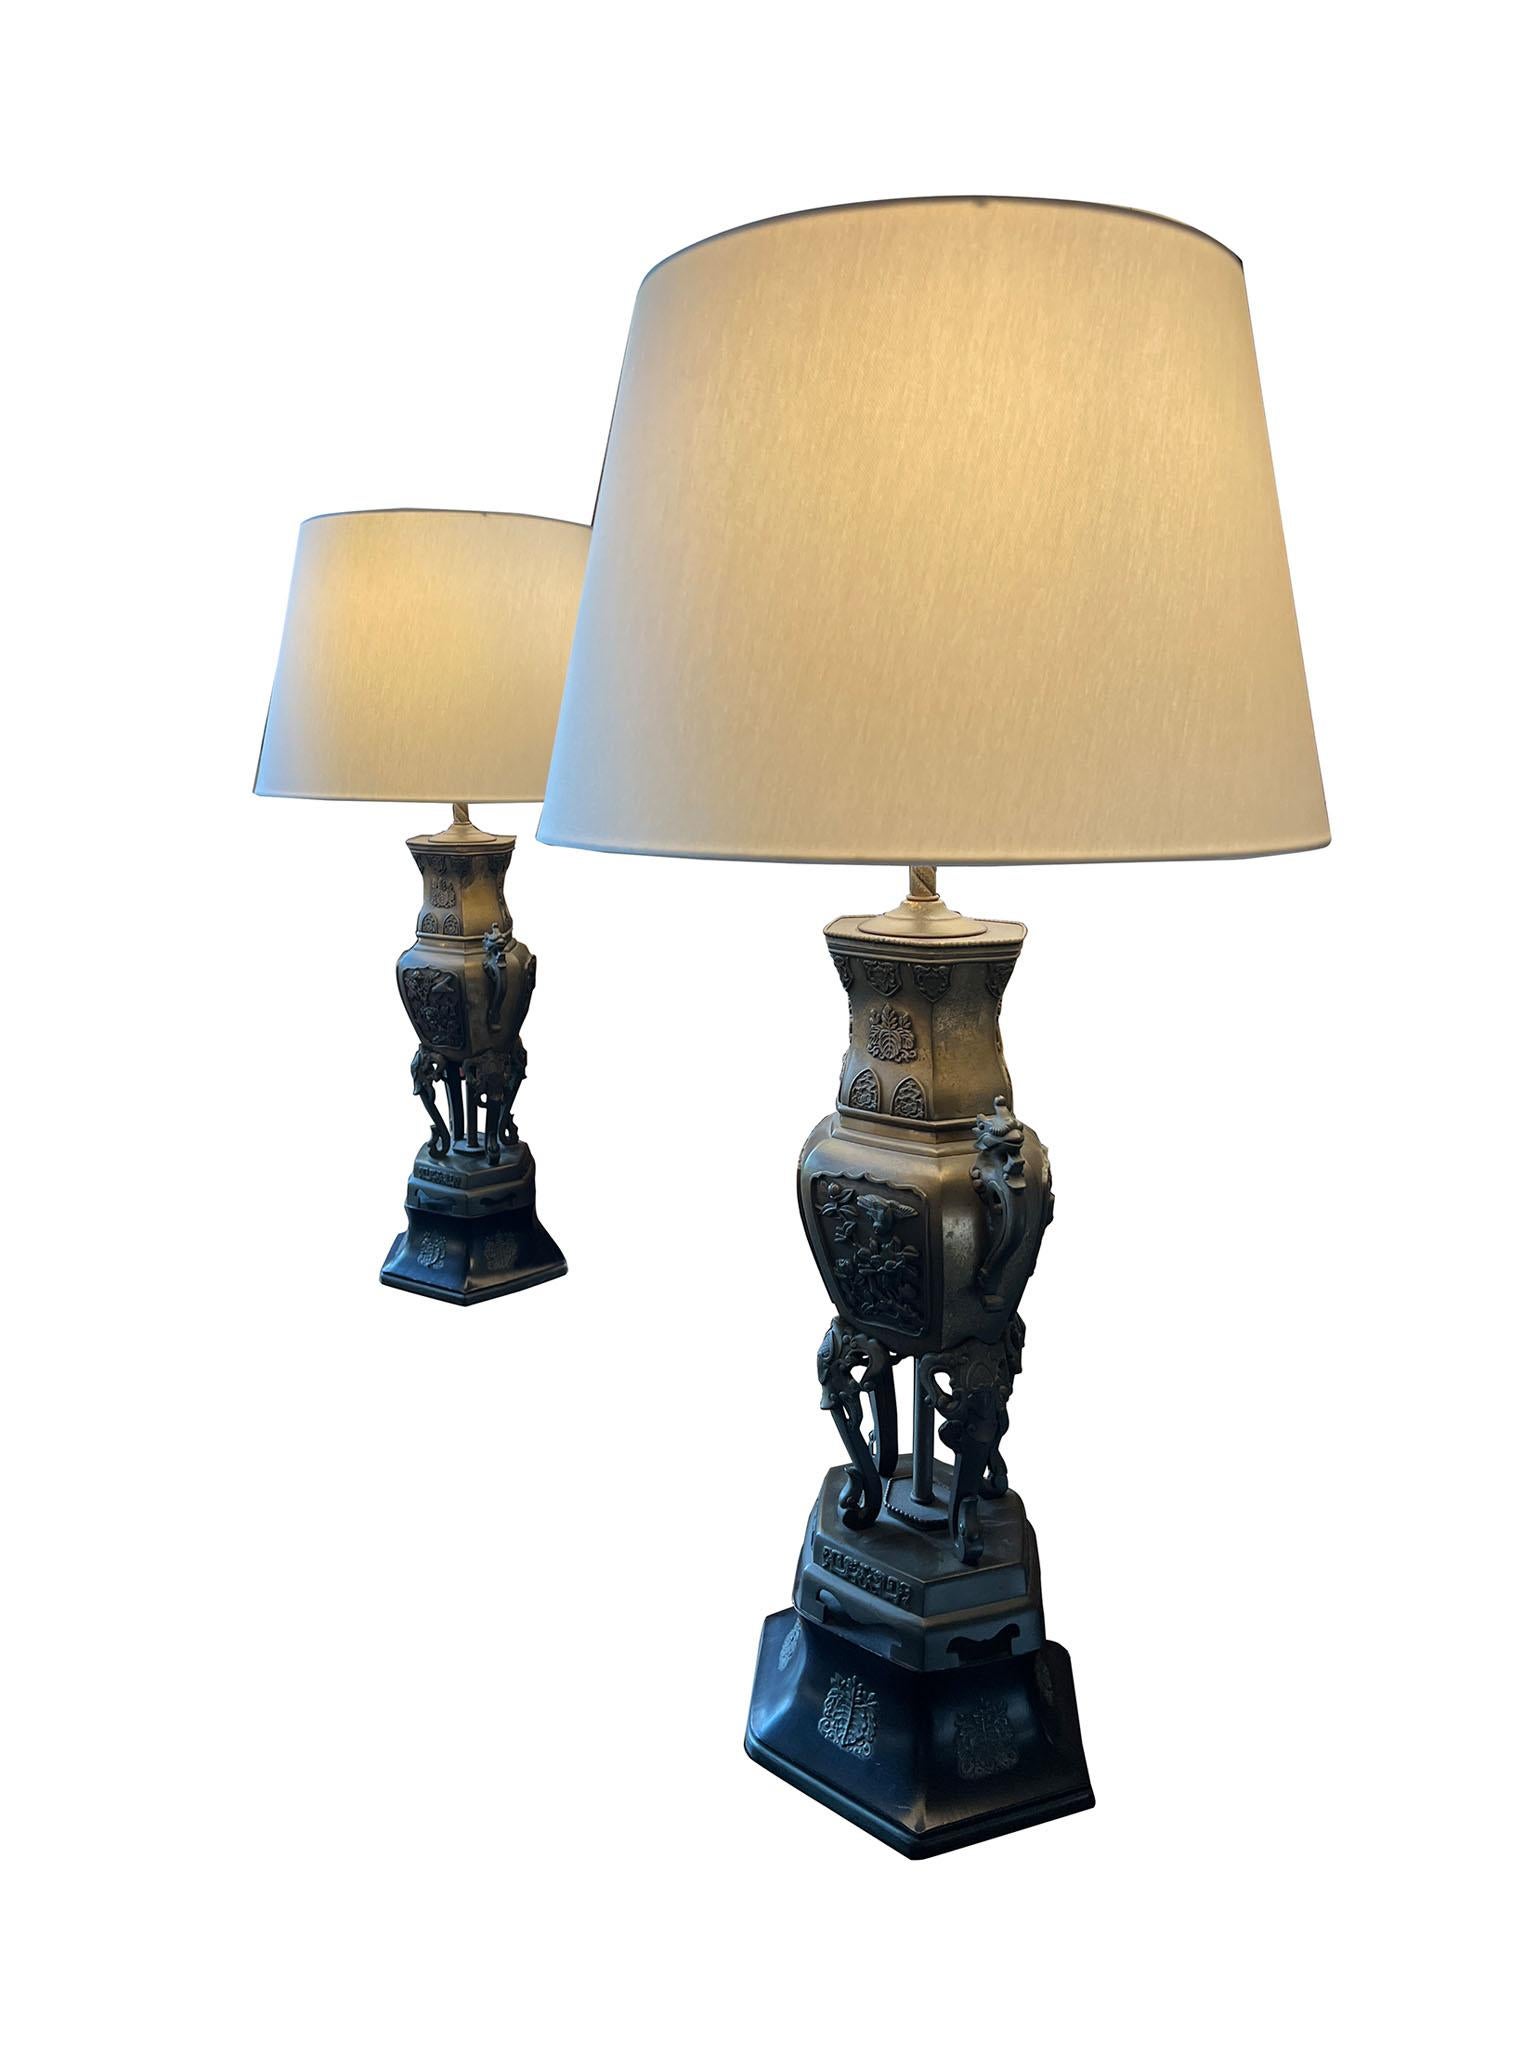  Impressive pair of Chinese bronze table lamps in the style of influential 20th Century American furniture designer James Mont. The lamps, crafted in oil rubbed bronze, resemble traditional Chinese urns atop hexagonal pedestals. Two dragons sit as